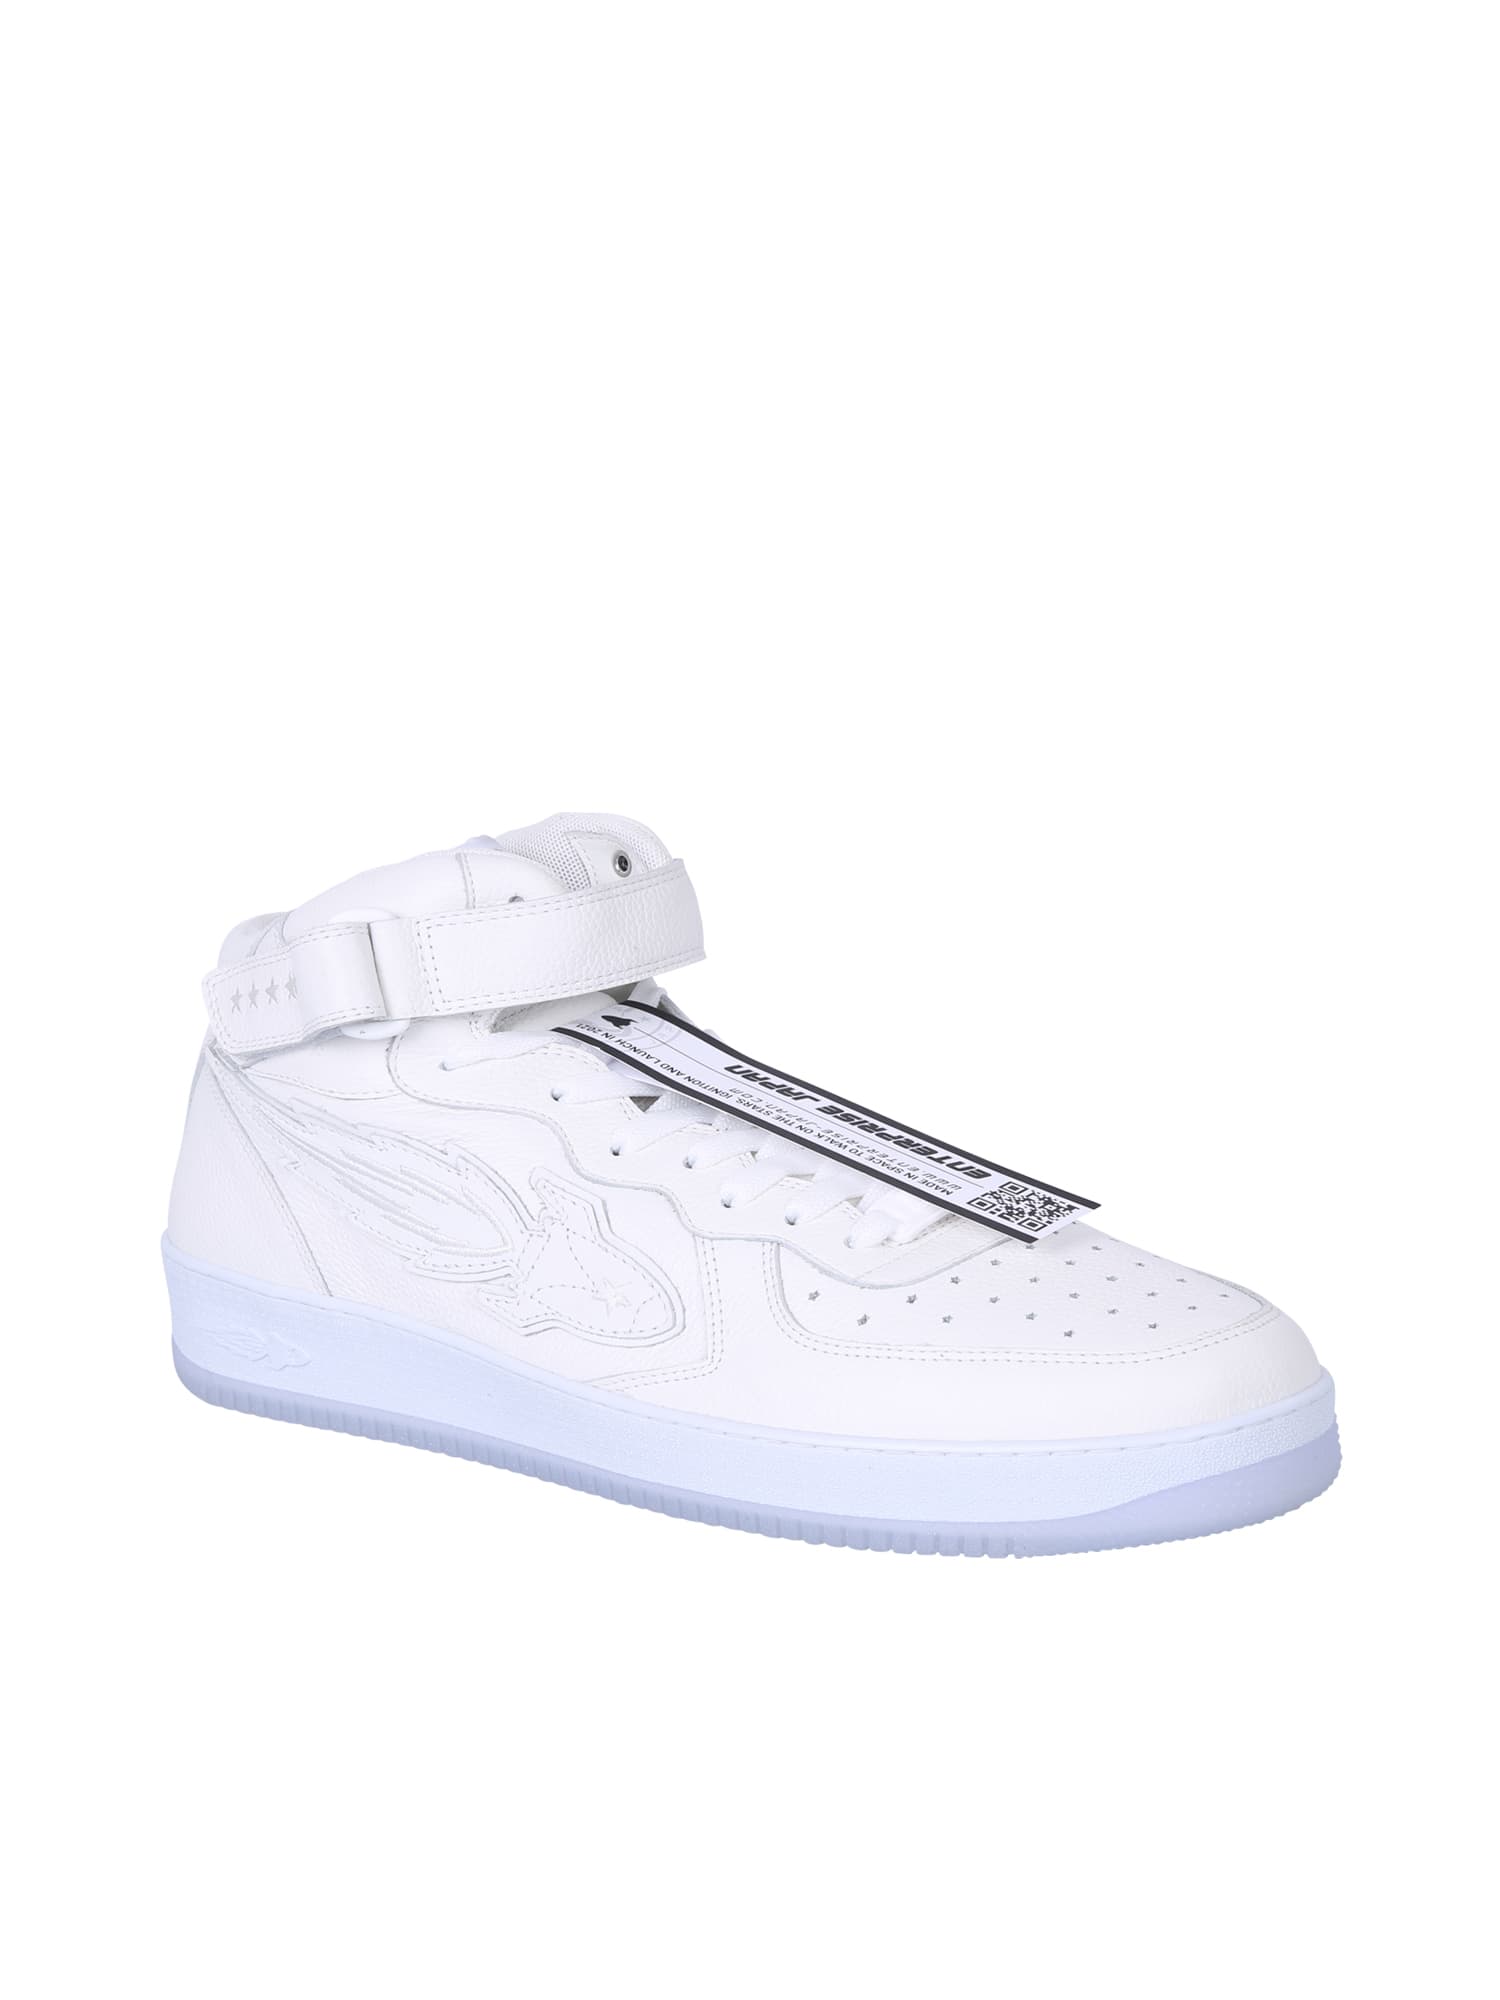 Shop Enterprise Japan Lace Up Sneakers In White